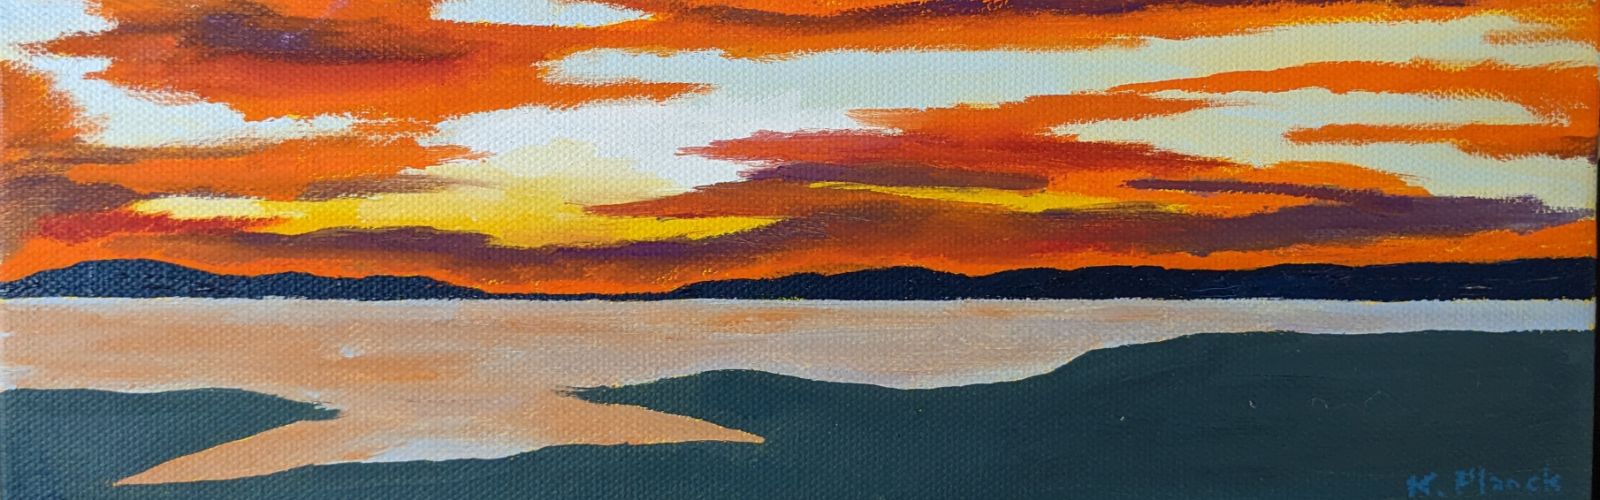 Oil painting from Miniatures, After Sunset, Indian Neck